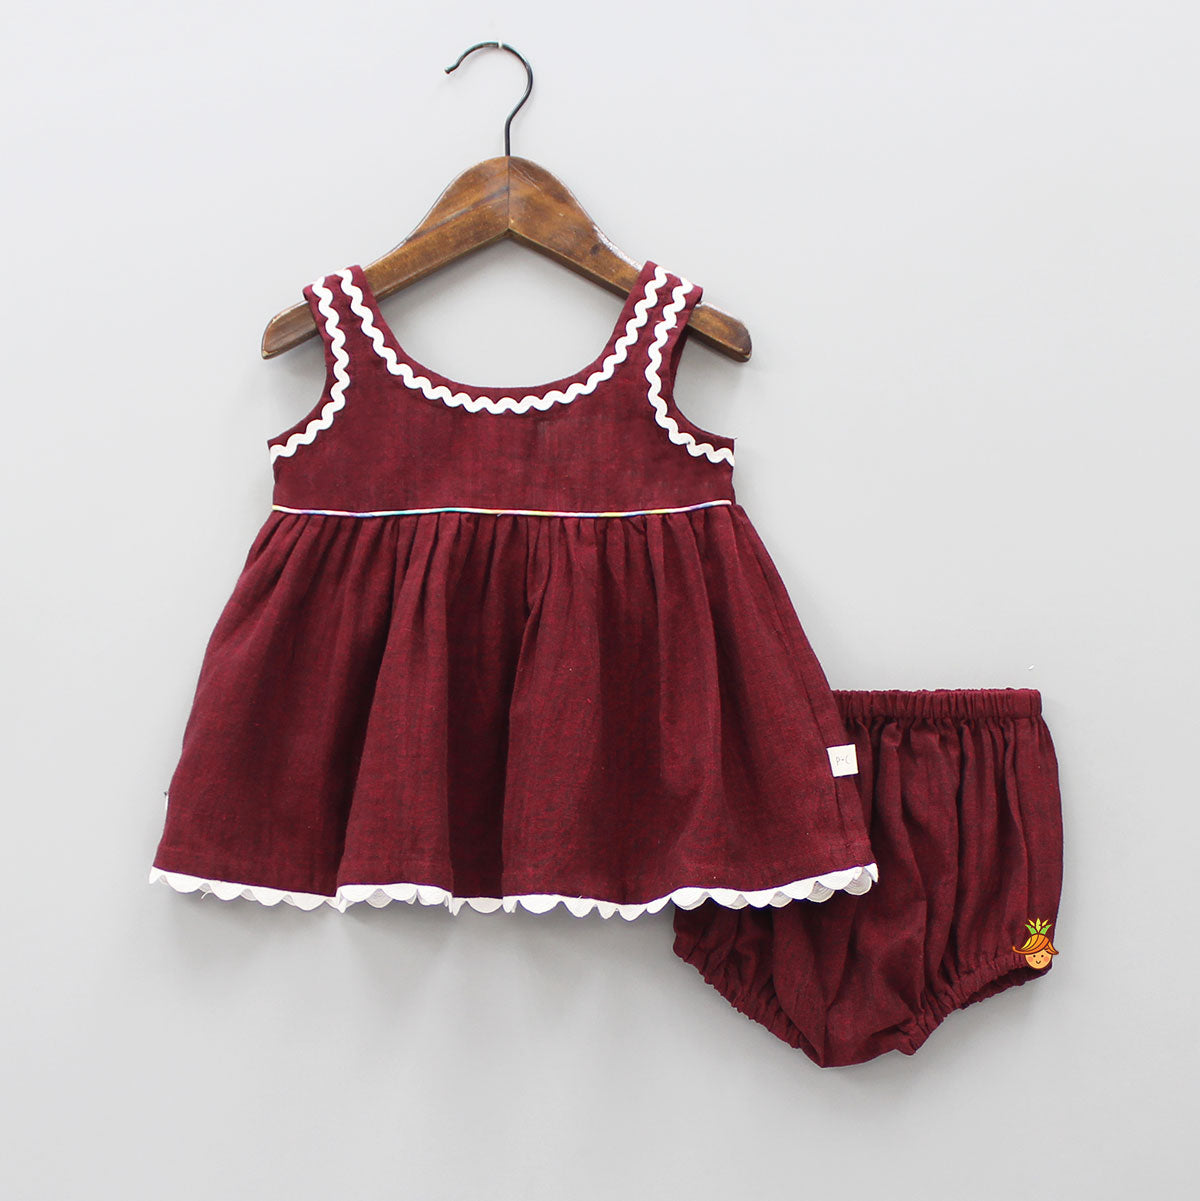 Pre Order: Lace Work Infant Top And Bloomer Set